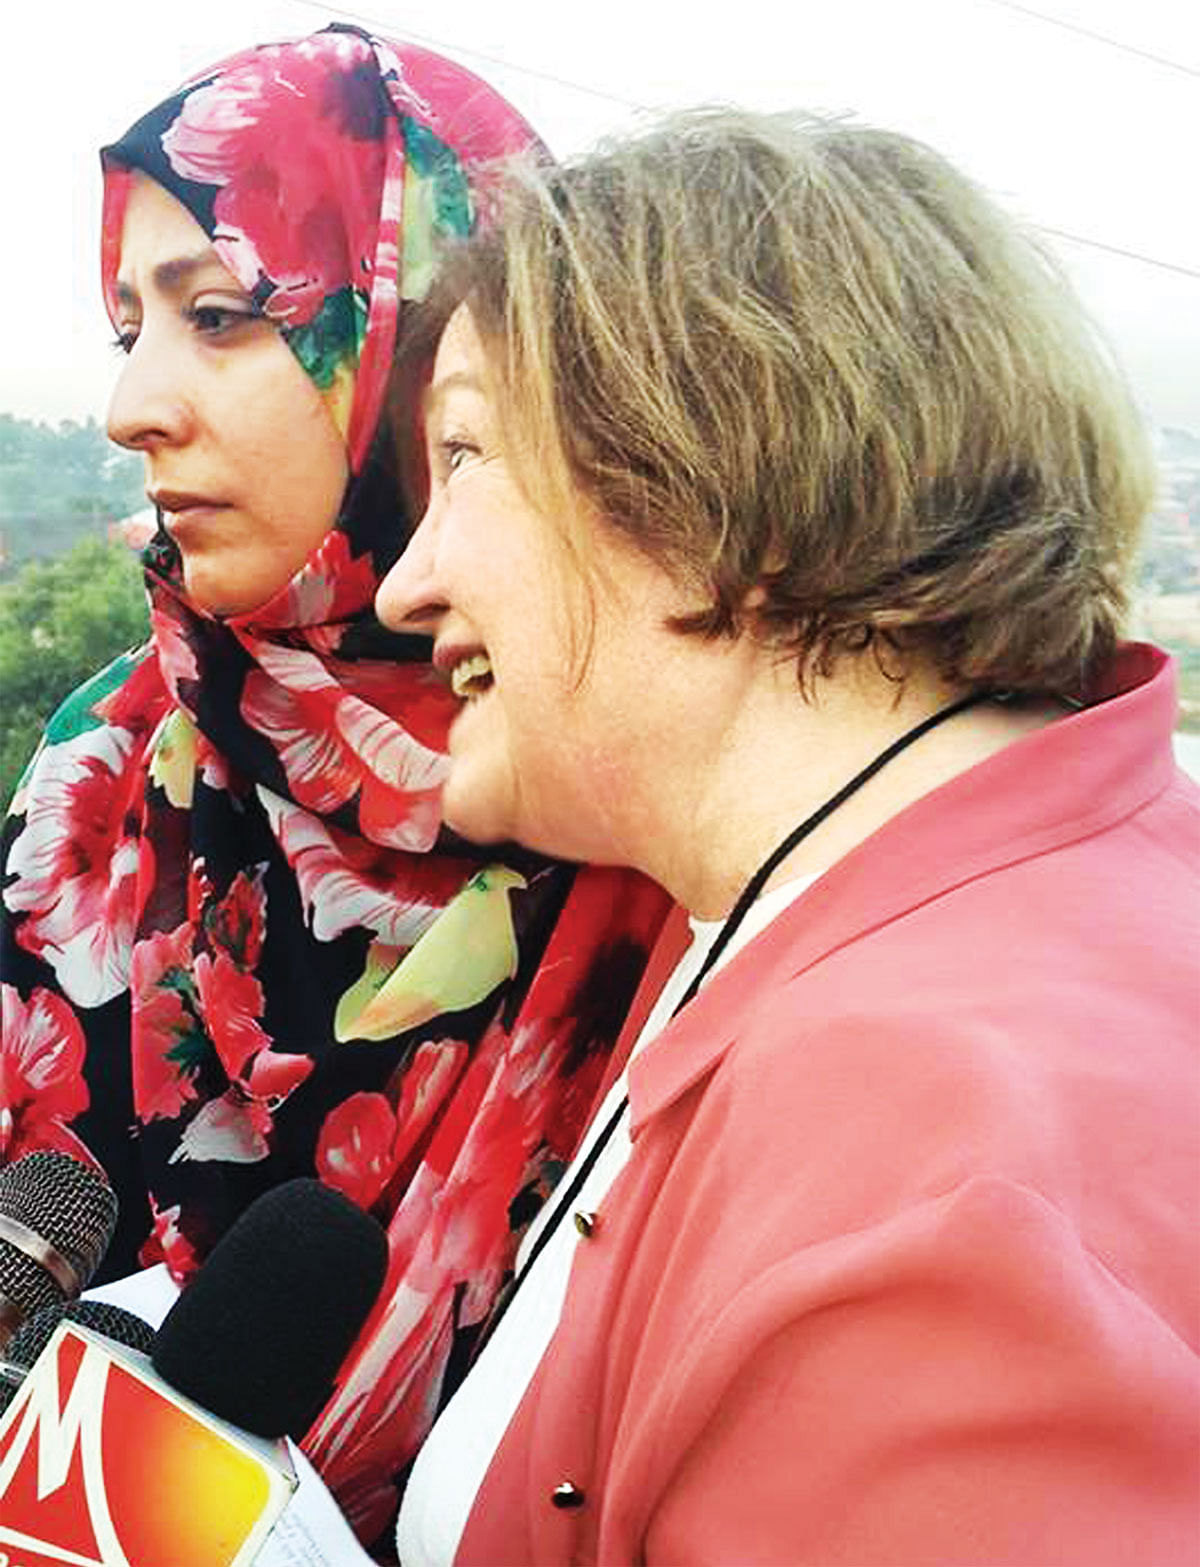 Nobel Laureates Tawakkol Karman (L) and Mairead Maguire (R) speaking with reporters after visiting Kutupalong Rohingya camp on Sunday. Photo: Prothom Alo